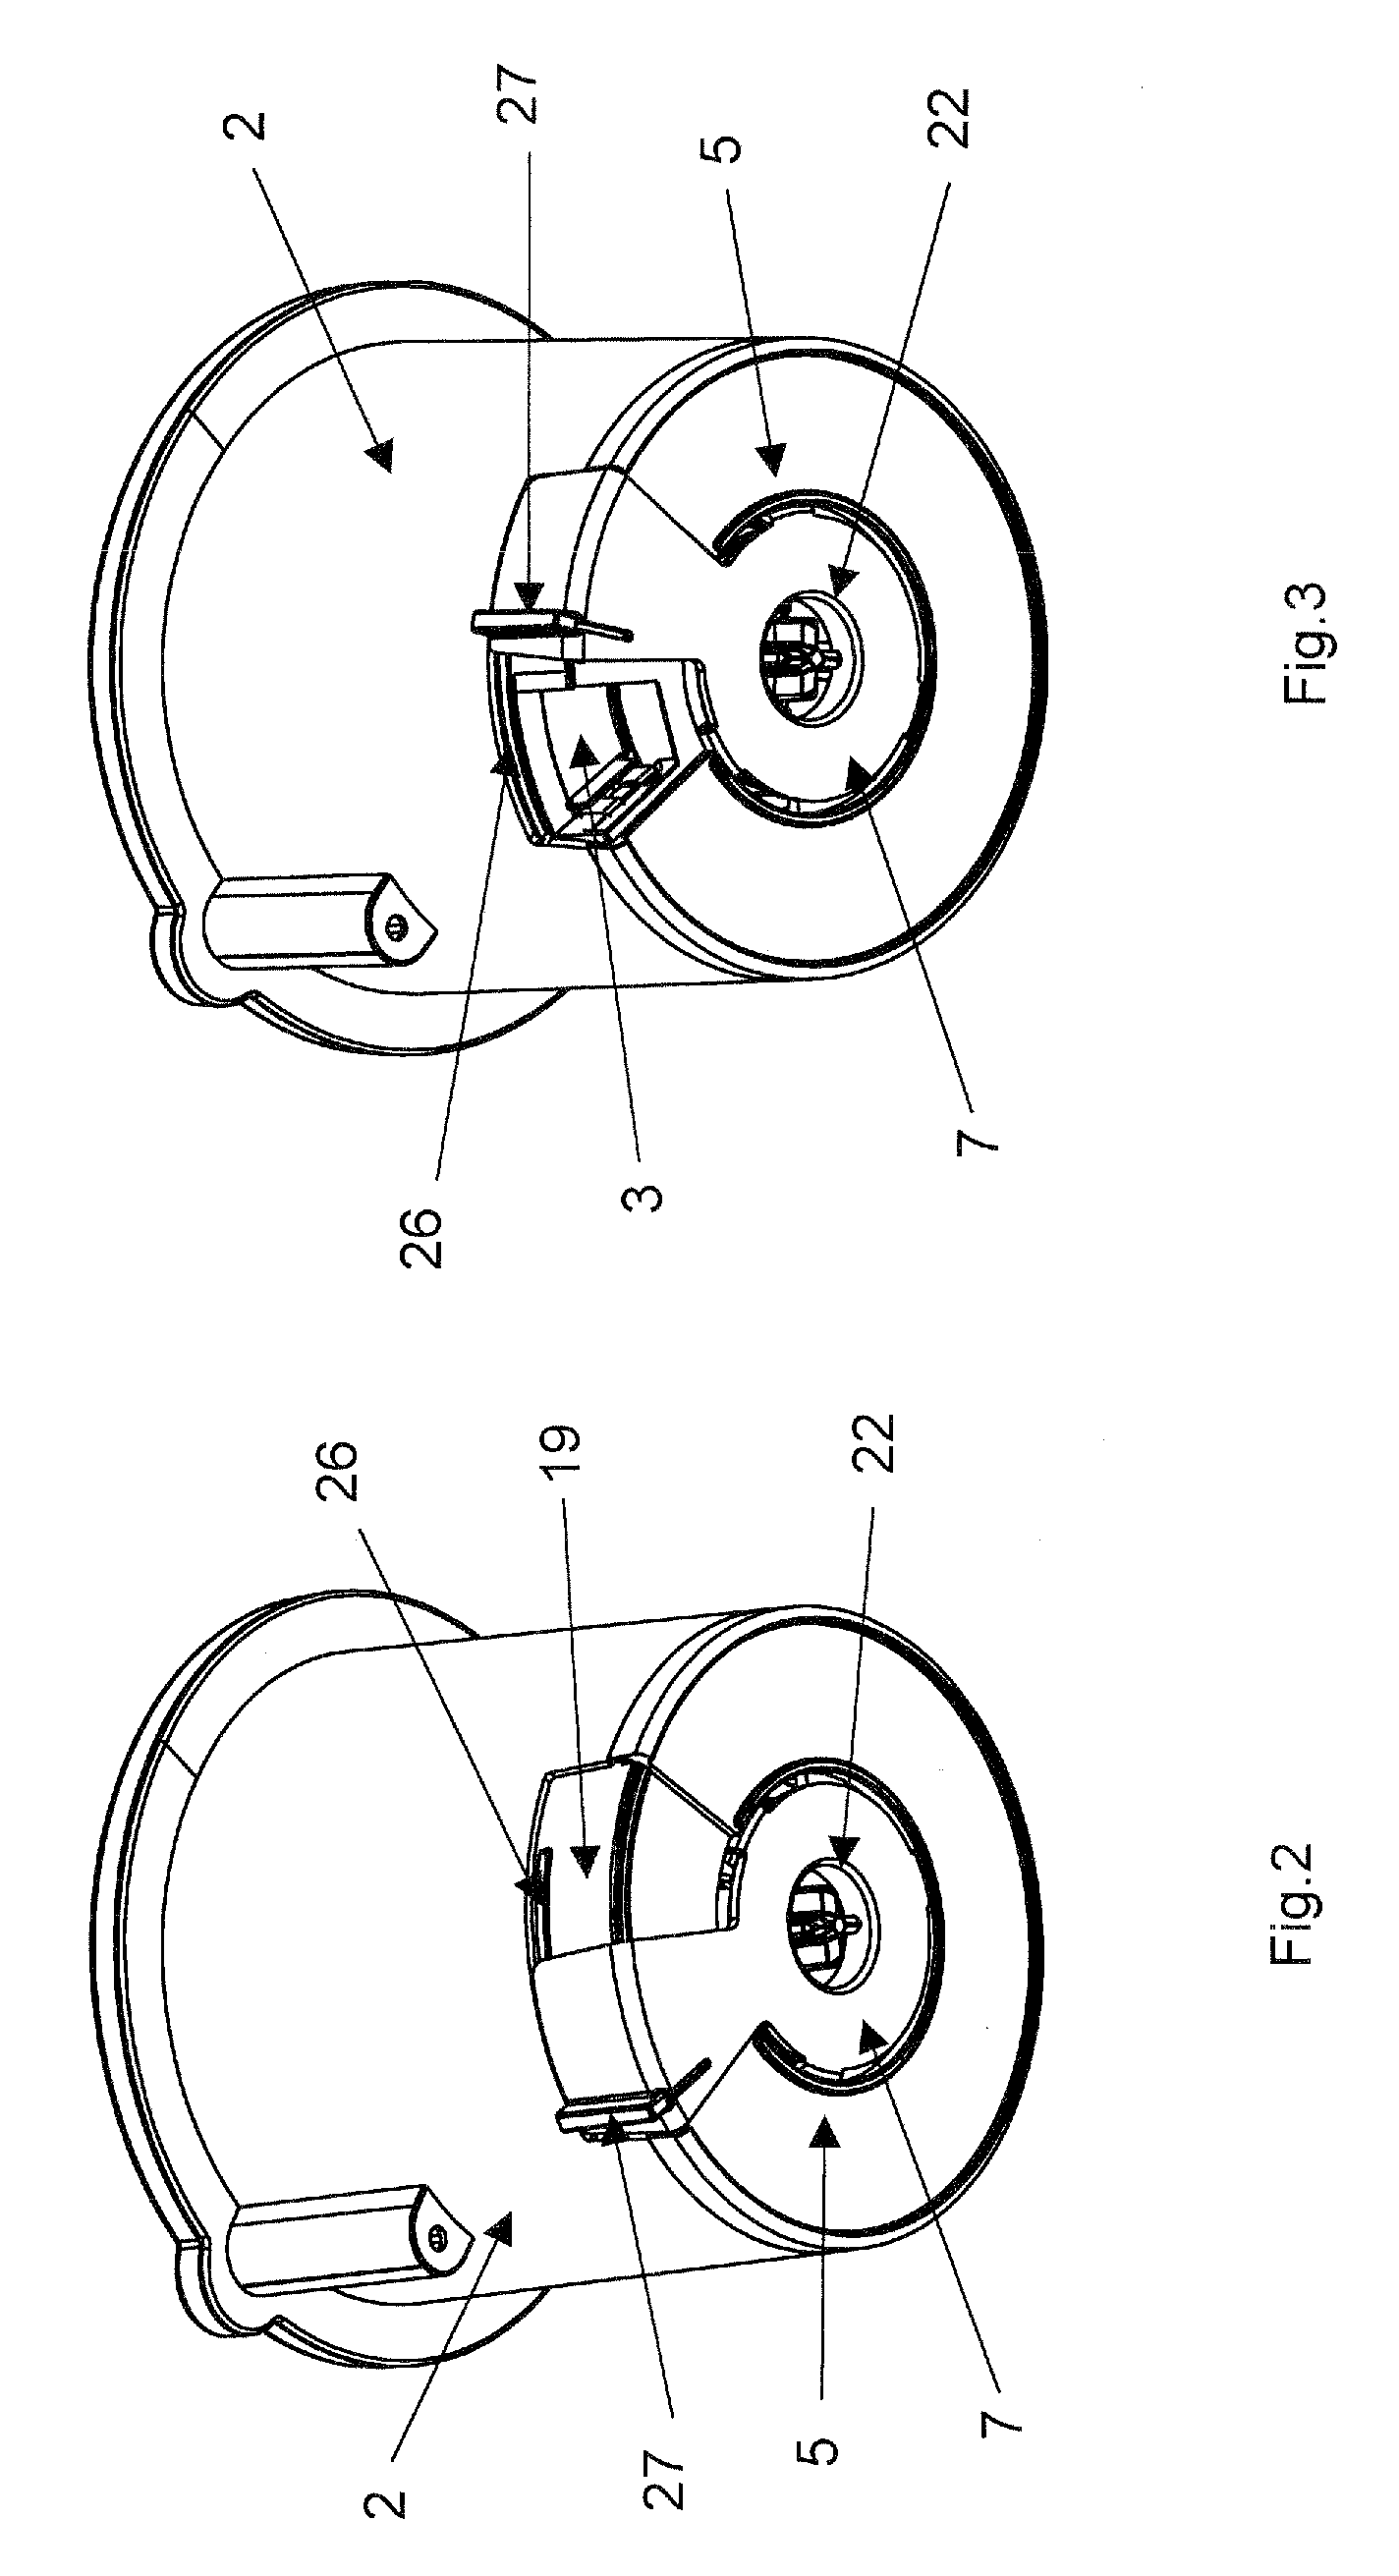 Dispenser of powdered product having a removable reservoir